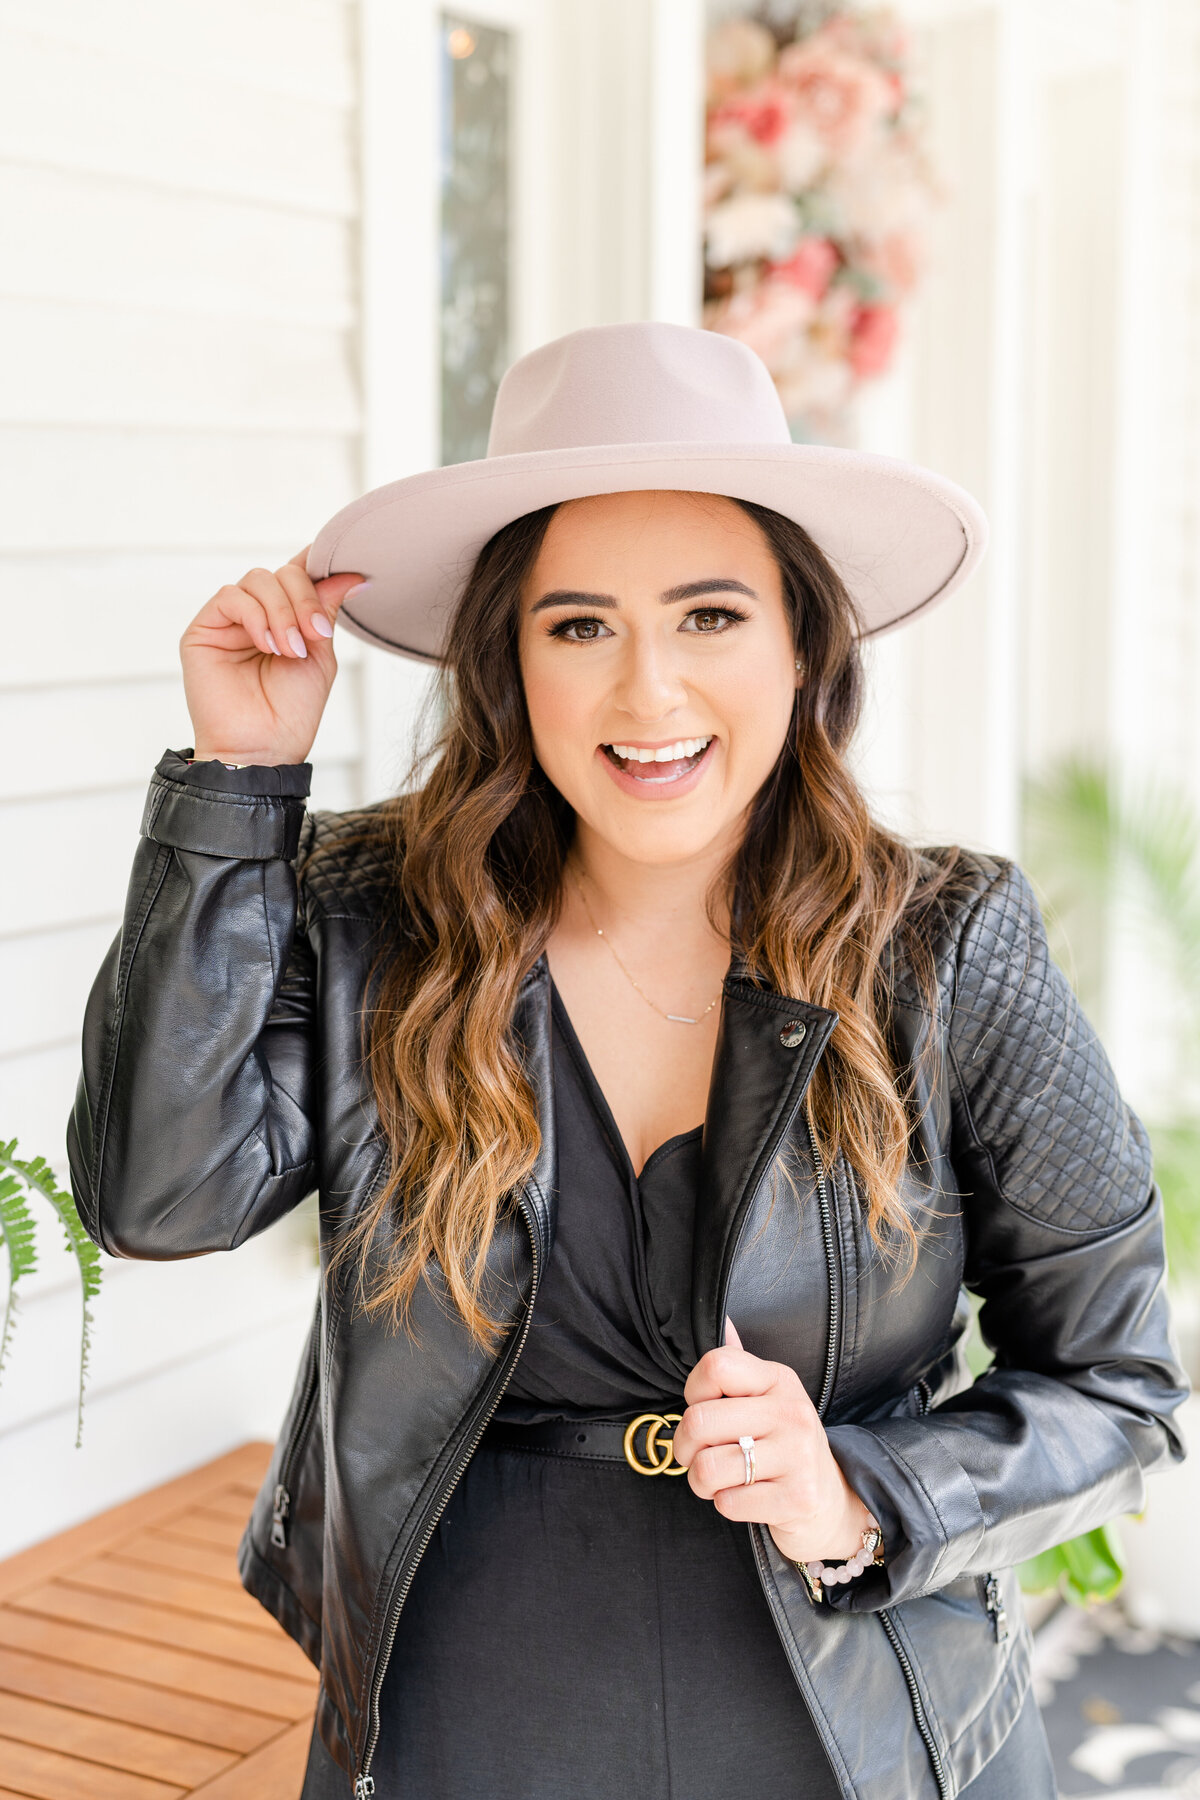 Woman laughing at camera holding black leather jacket and pink hat while standing on a front porch